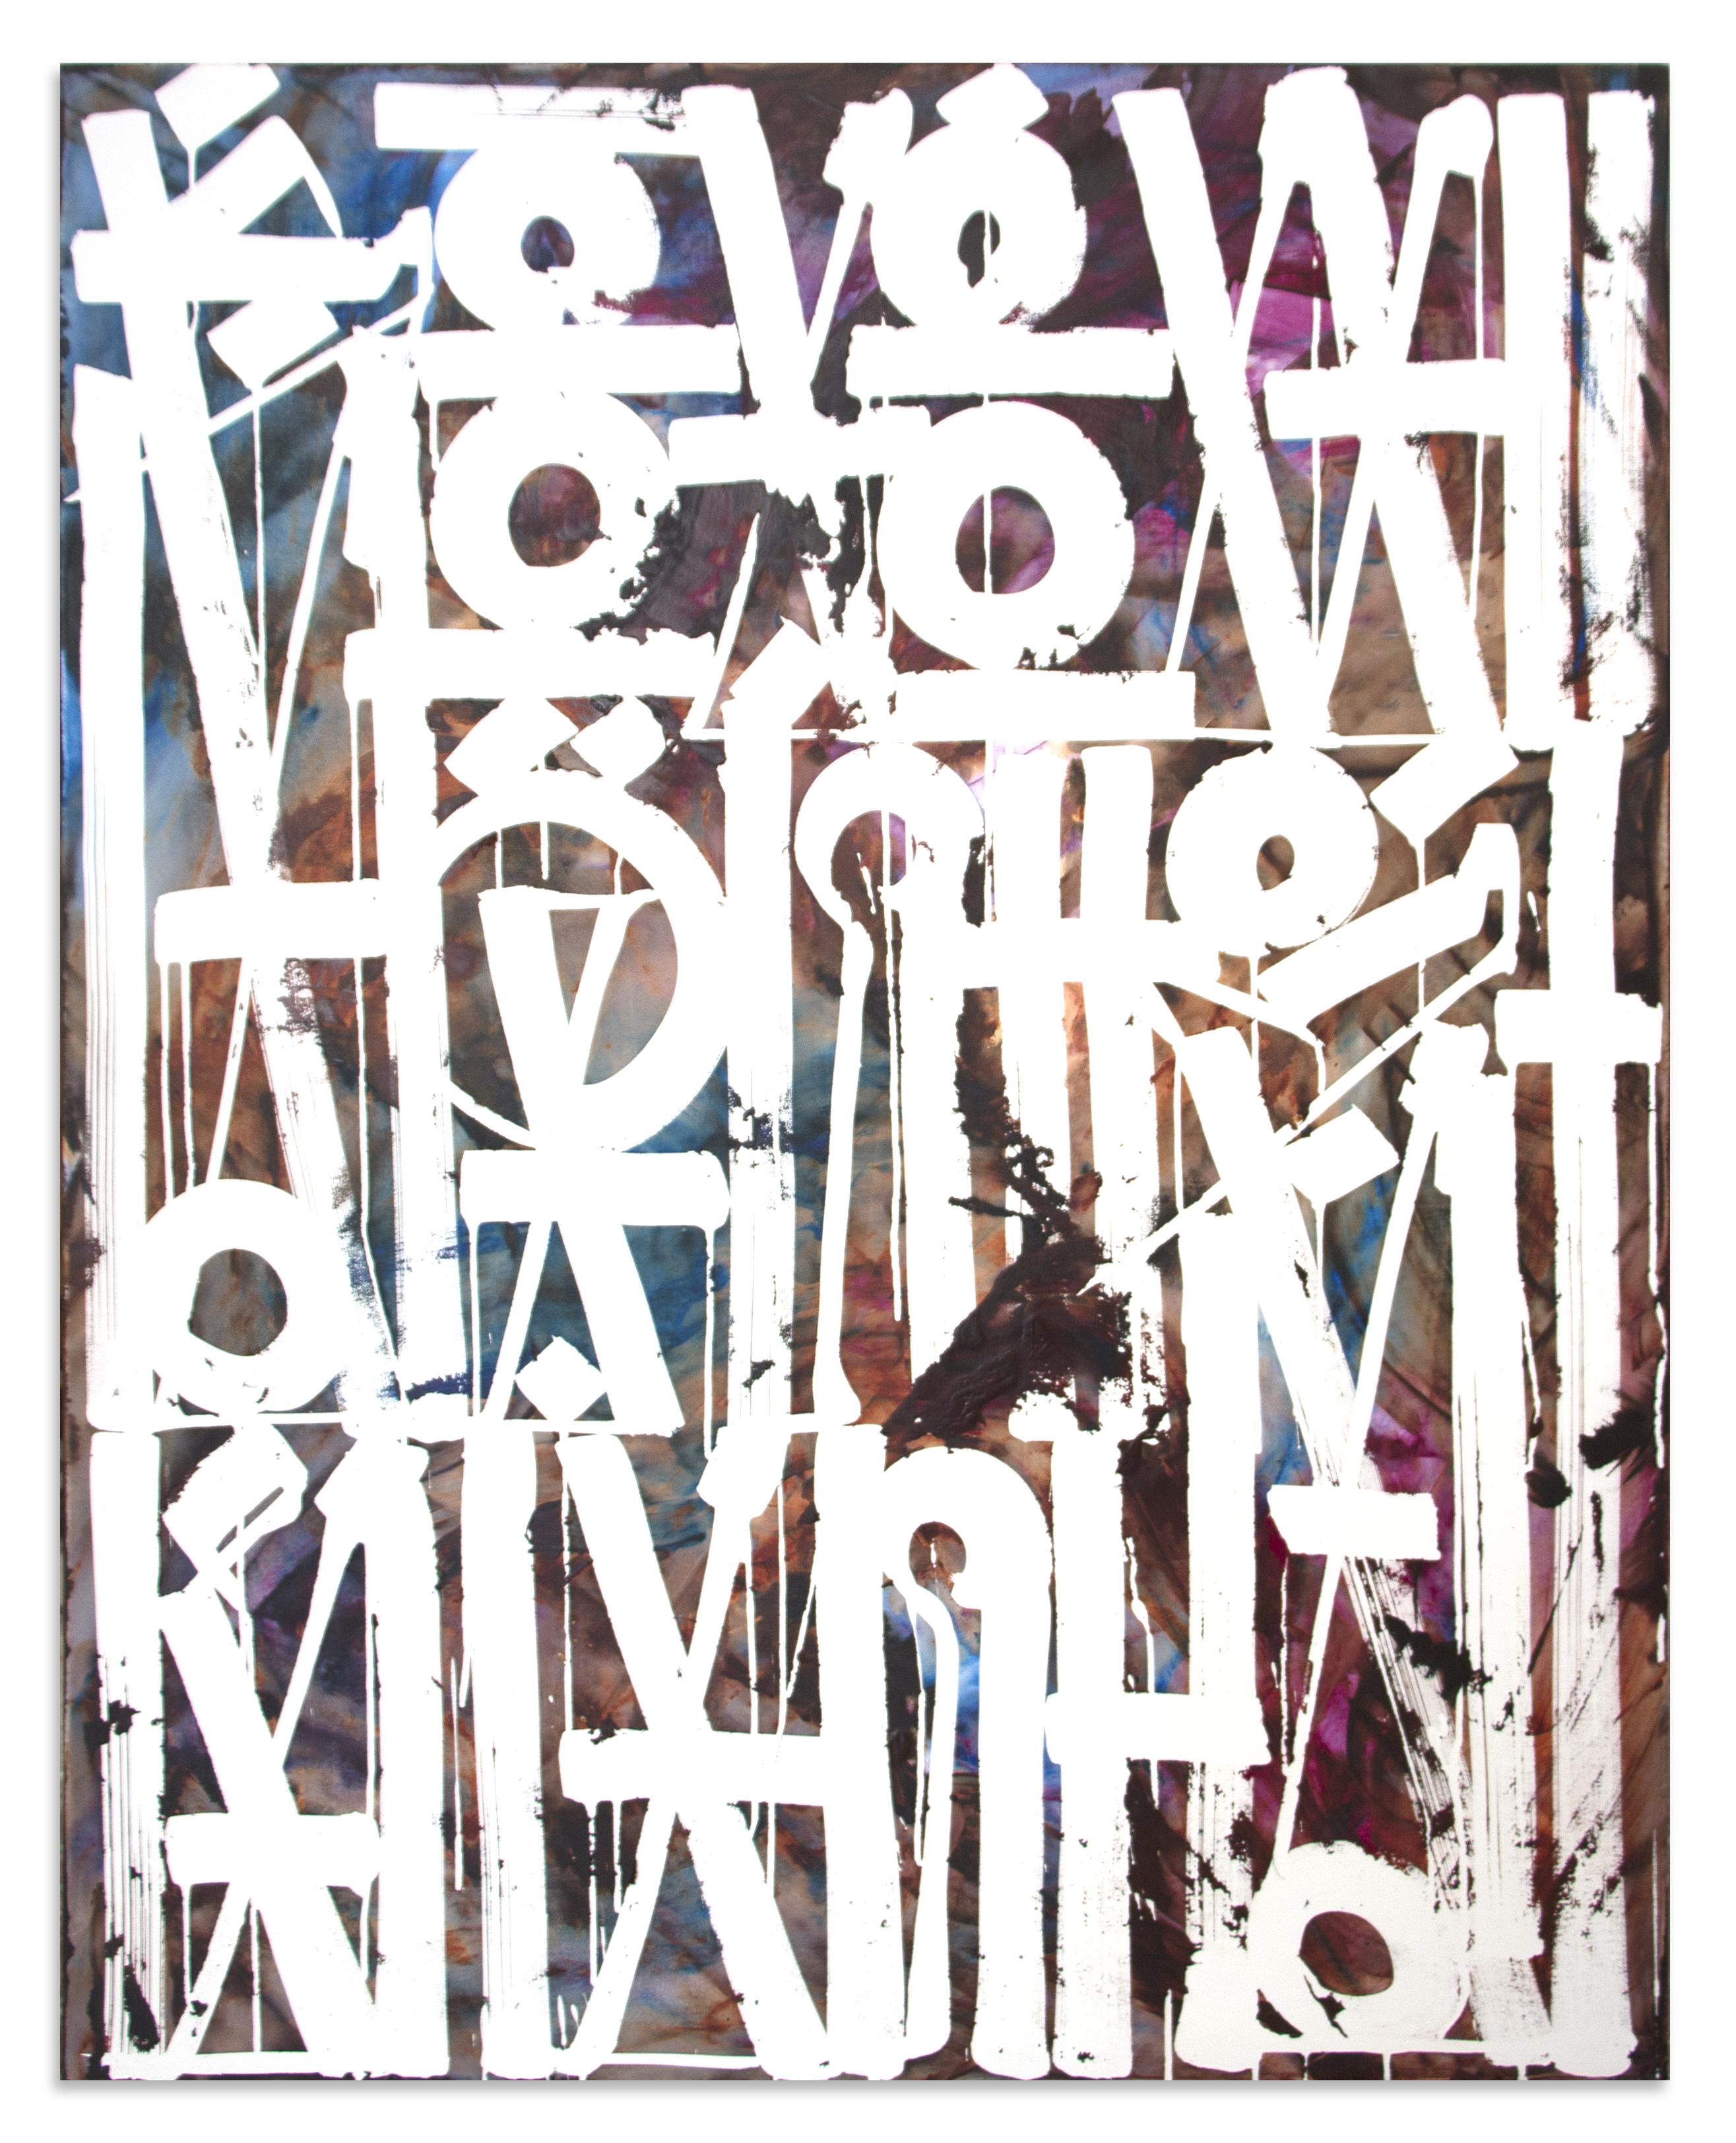 RETNA-So_You_Wanted_To_Run-122x96-Acrylic_On_Canvas